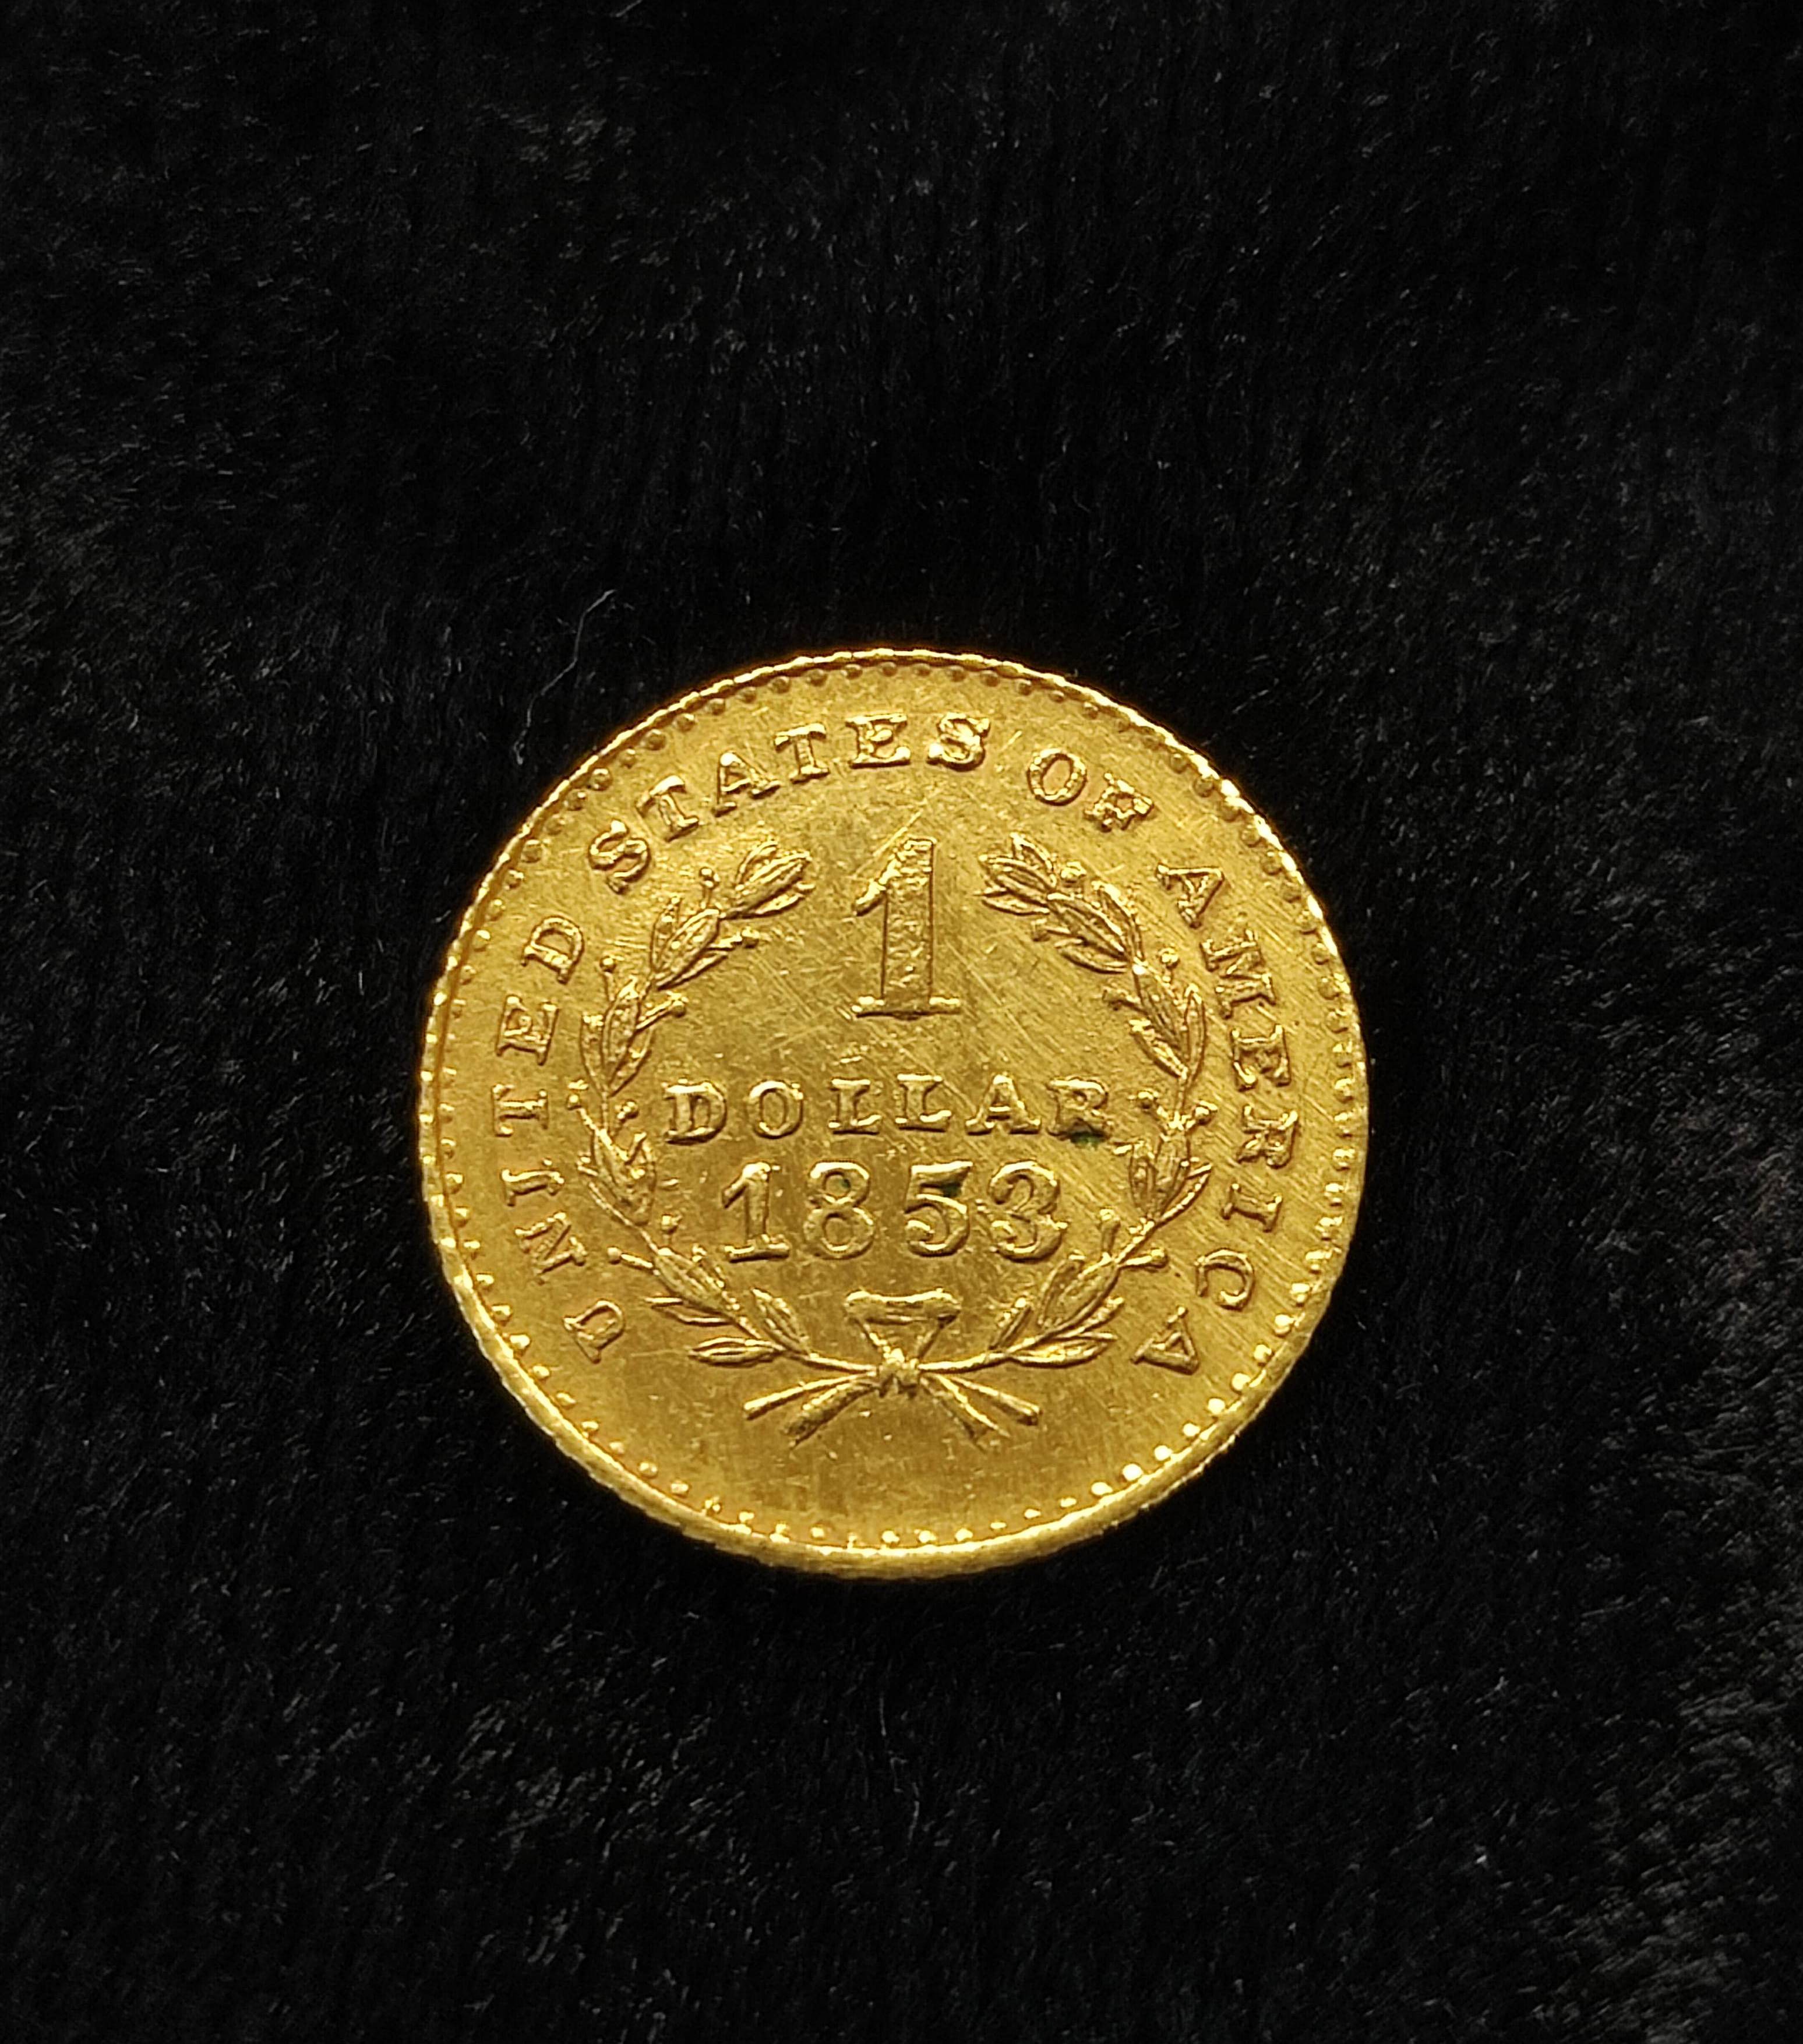 USA. 1853 $1 .900 grade gold coin believed to be a jeweller's copy. - Image 2 of 3